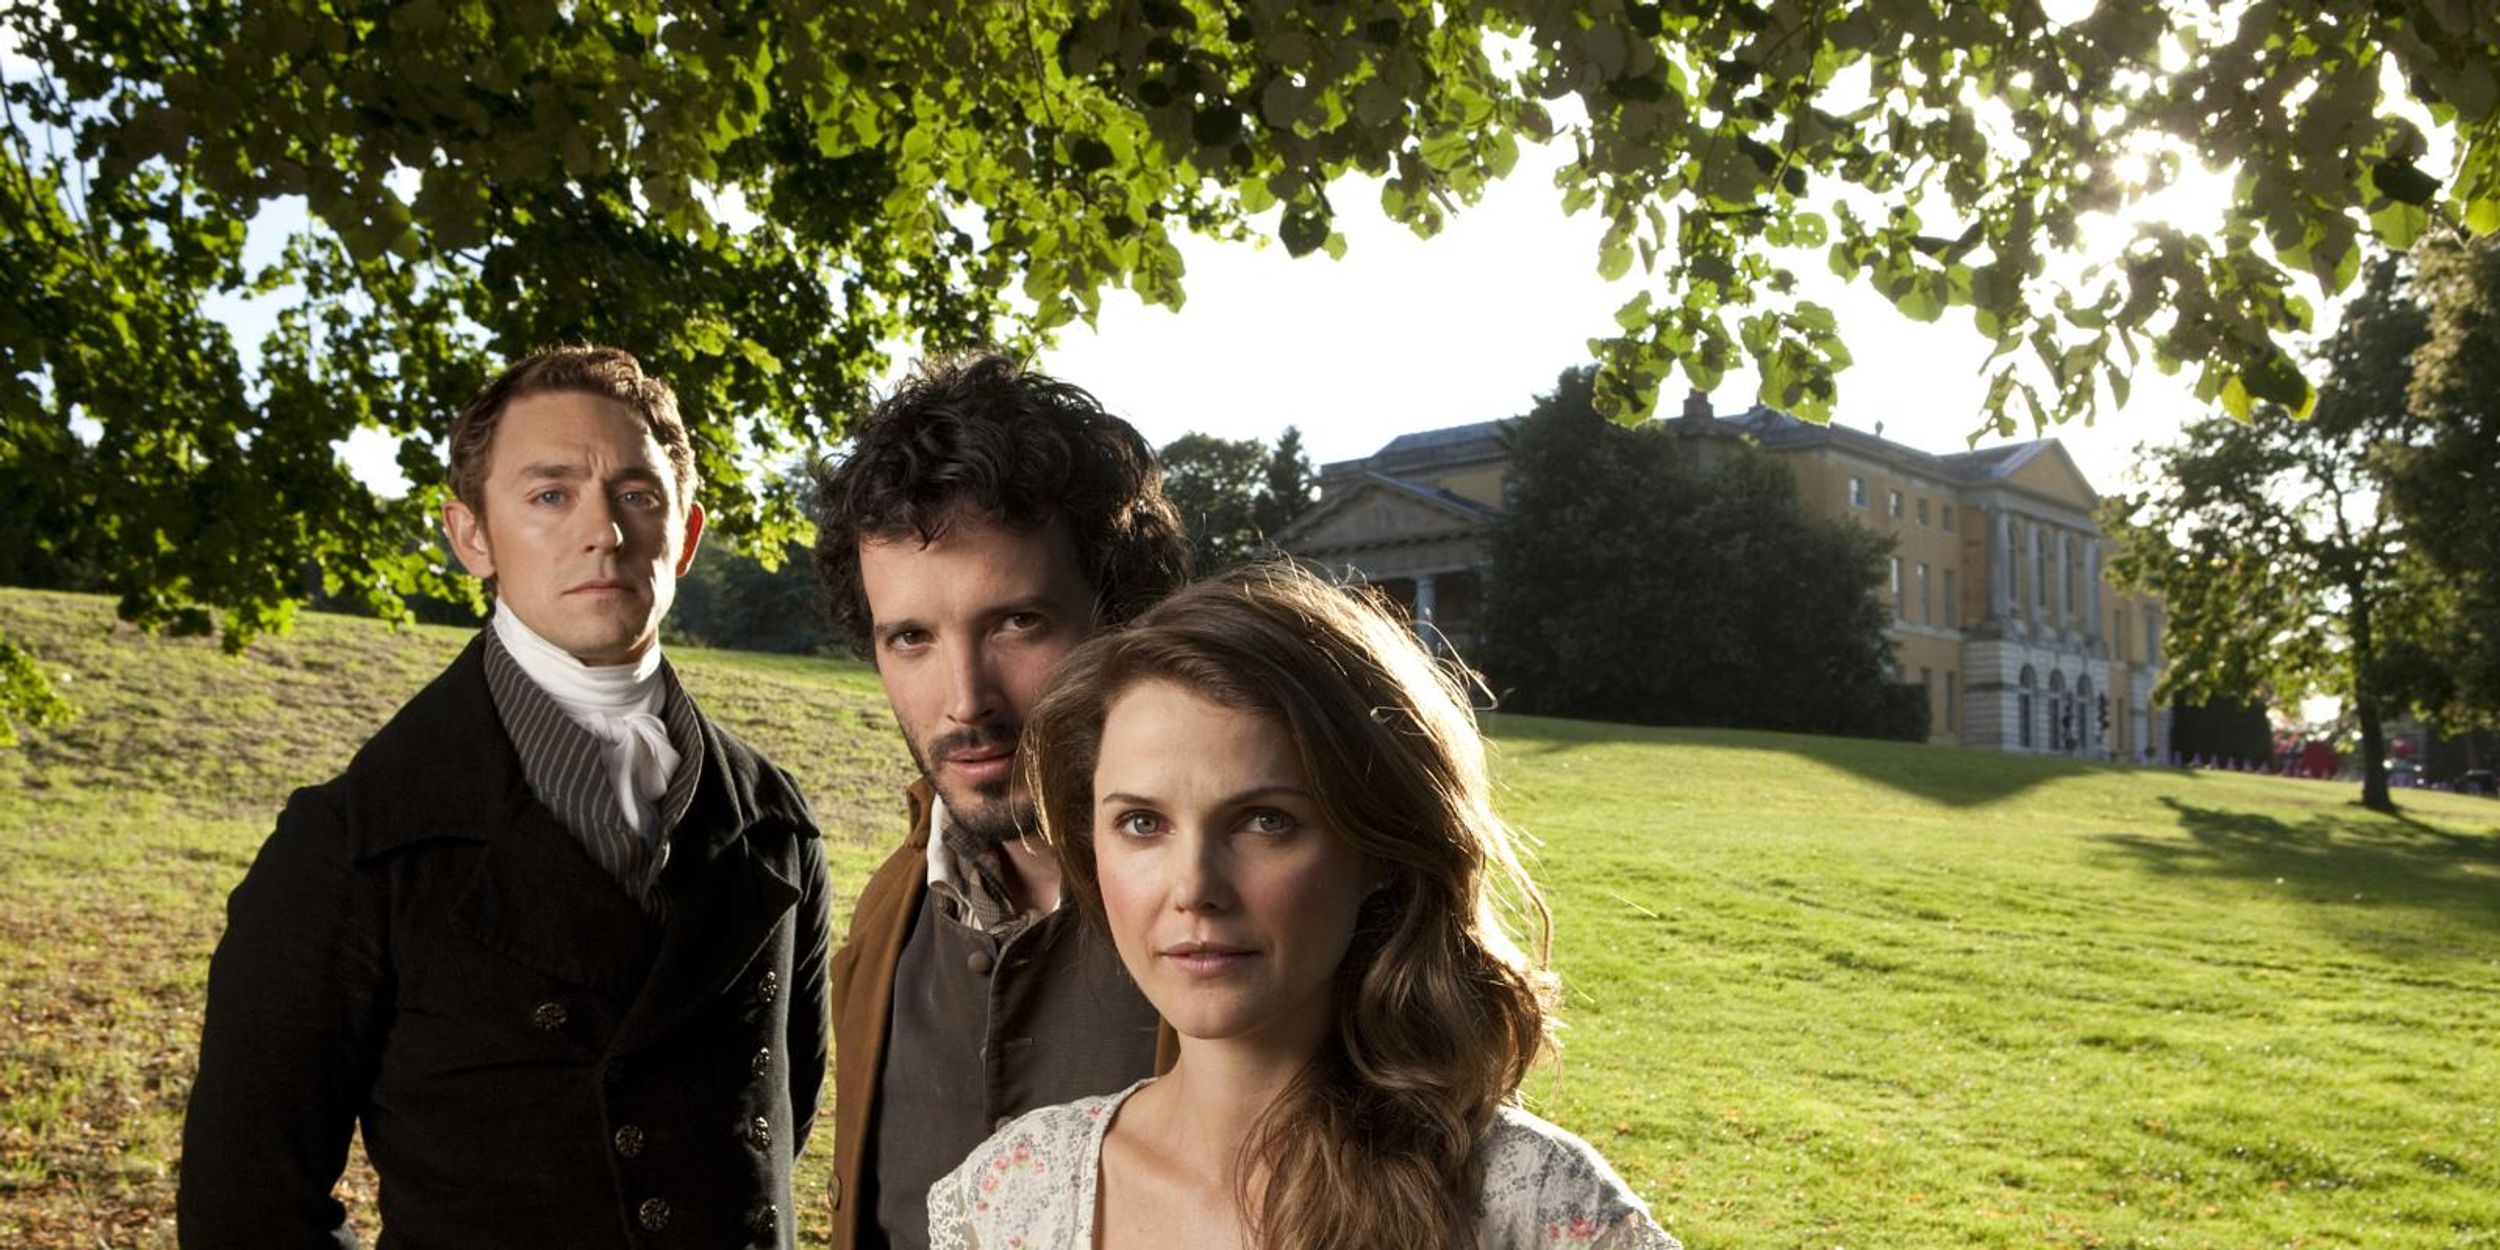 Austenland: 4 Differences Between The Book and The Movie